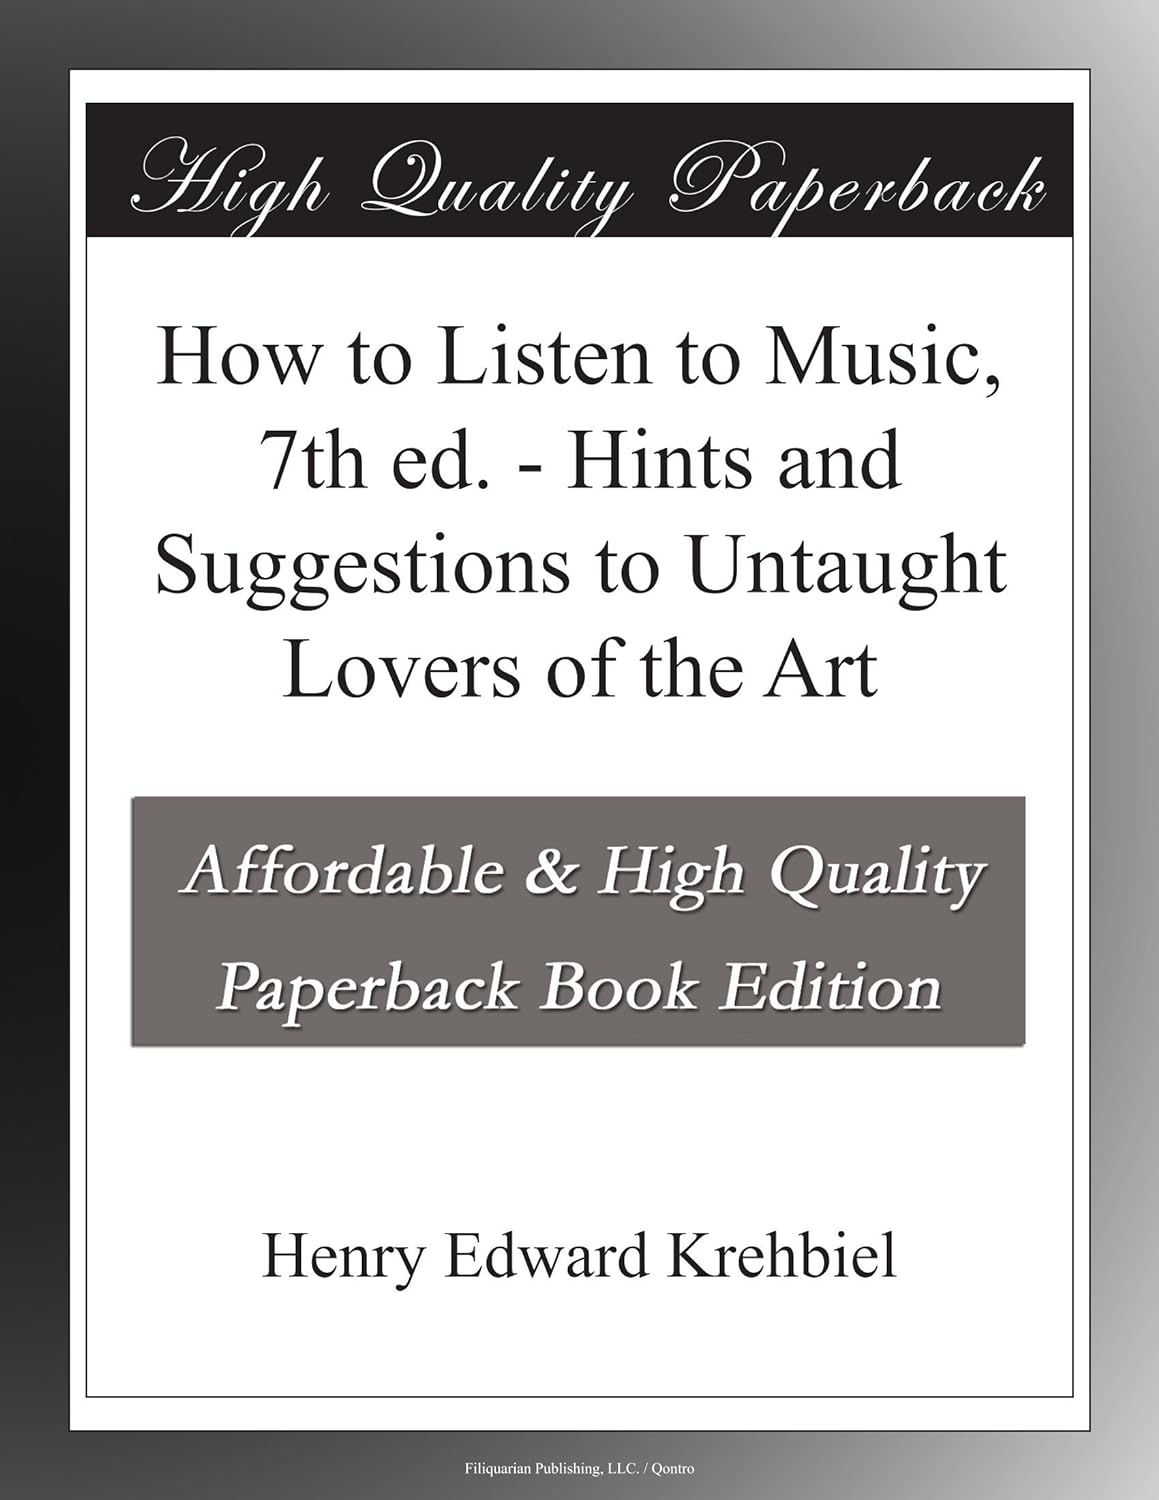 How to Listen to Music, 7th ed